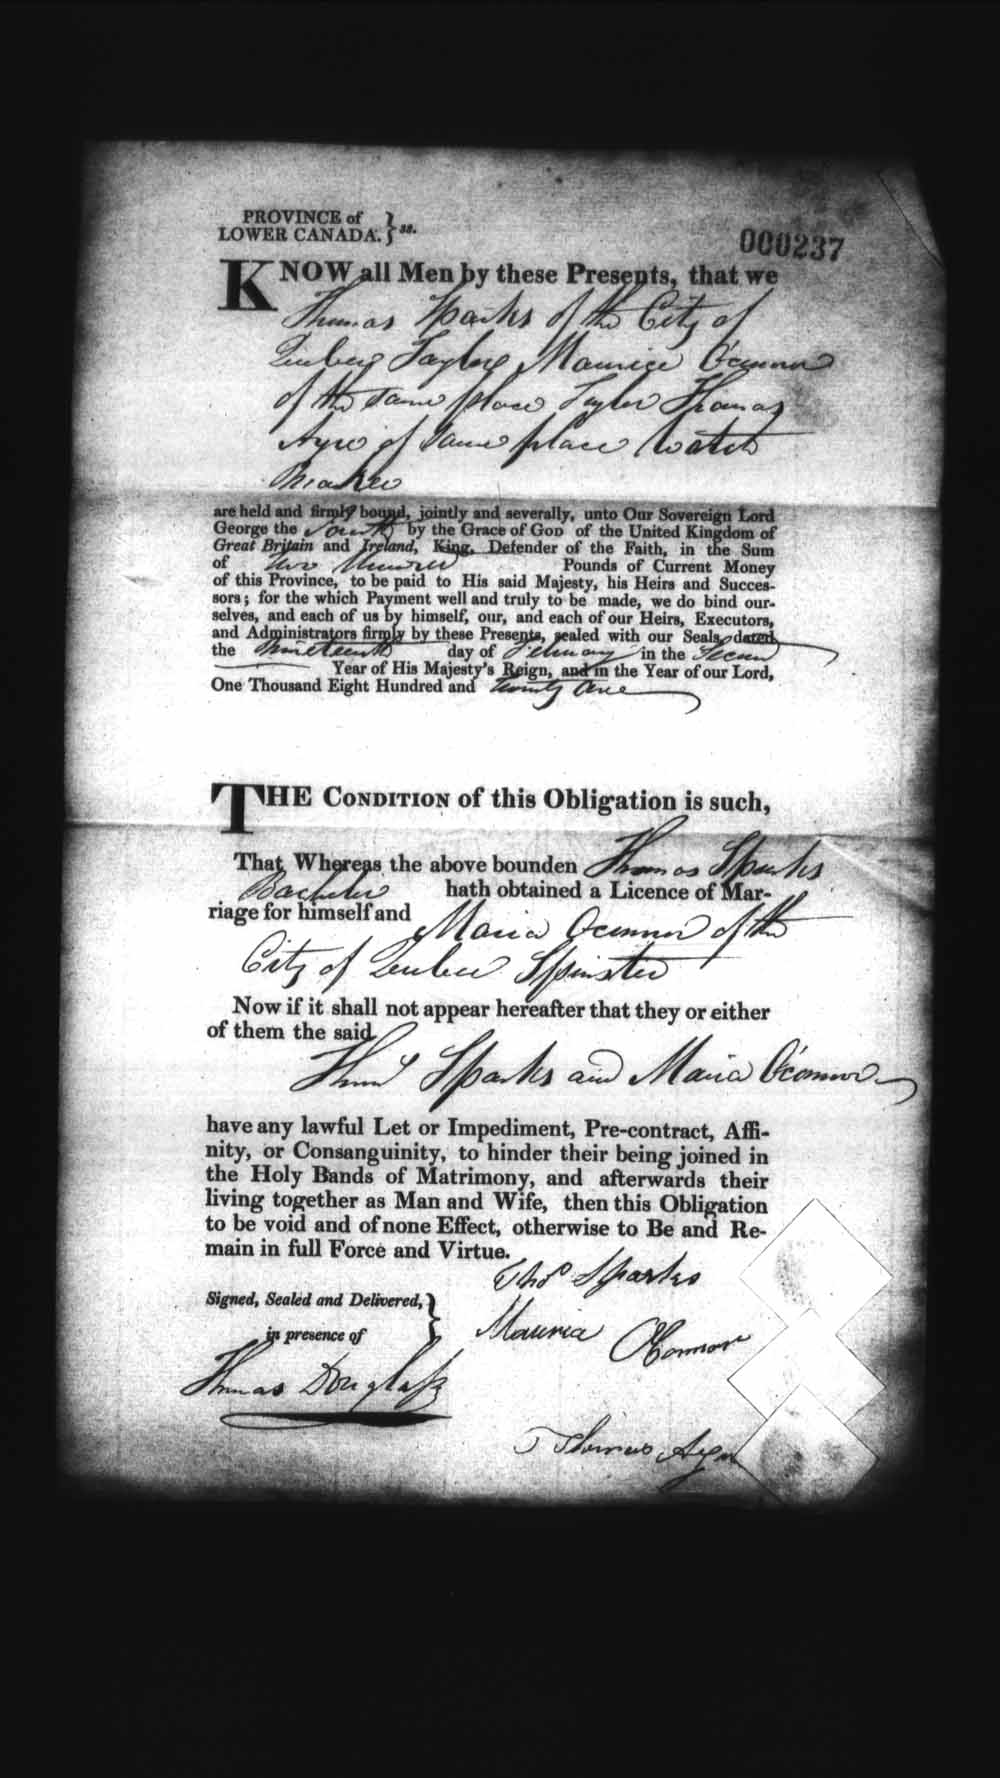 Digitized page of Upper and Lower Canada Marriage Bonds (1779-1865) for Image No.: e008236095